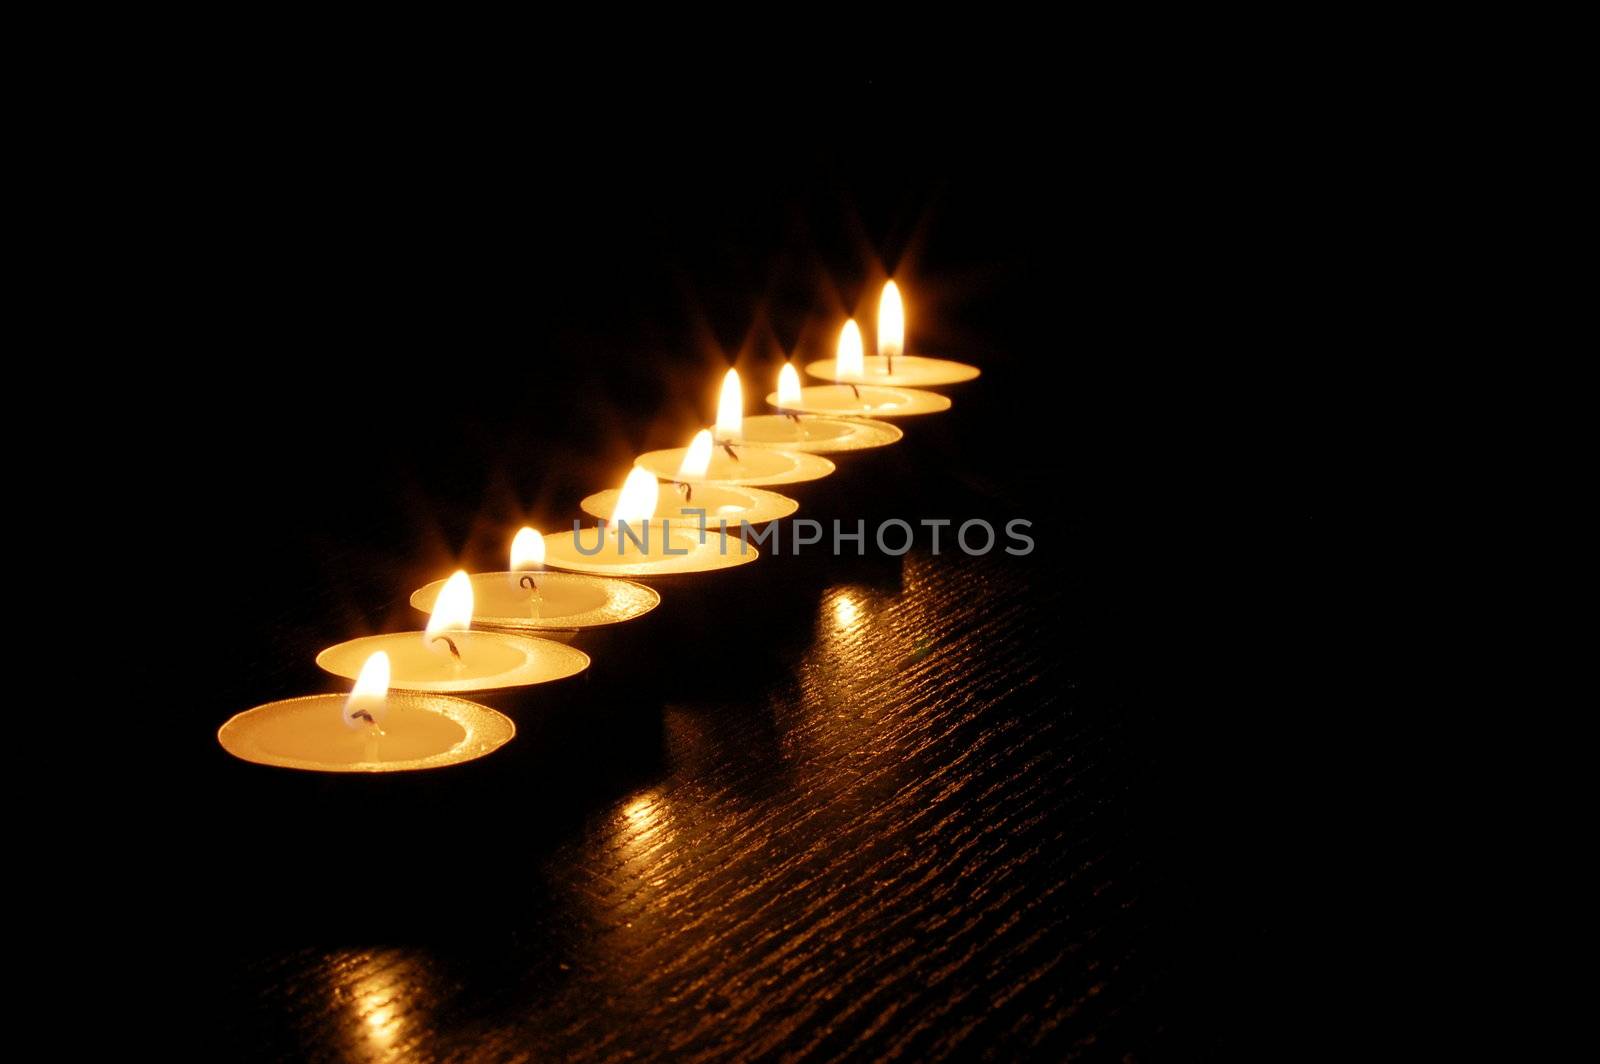 romantic candle light by gunnar3000